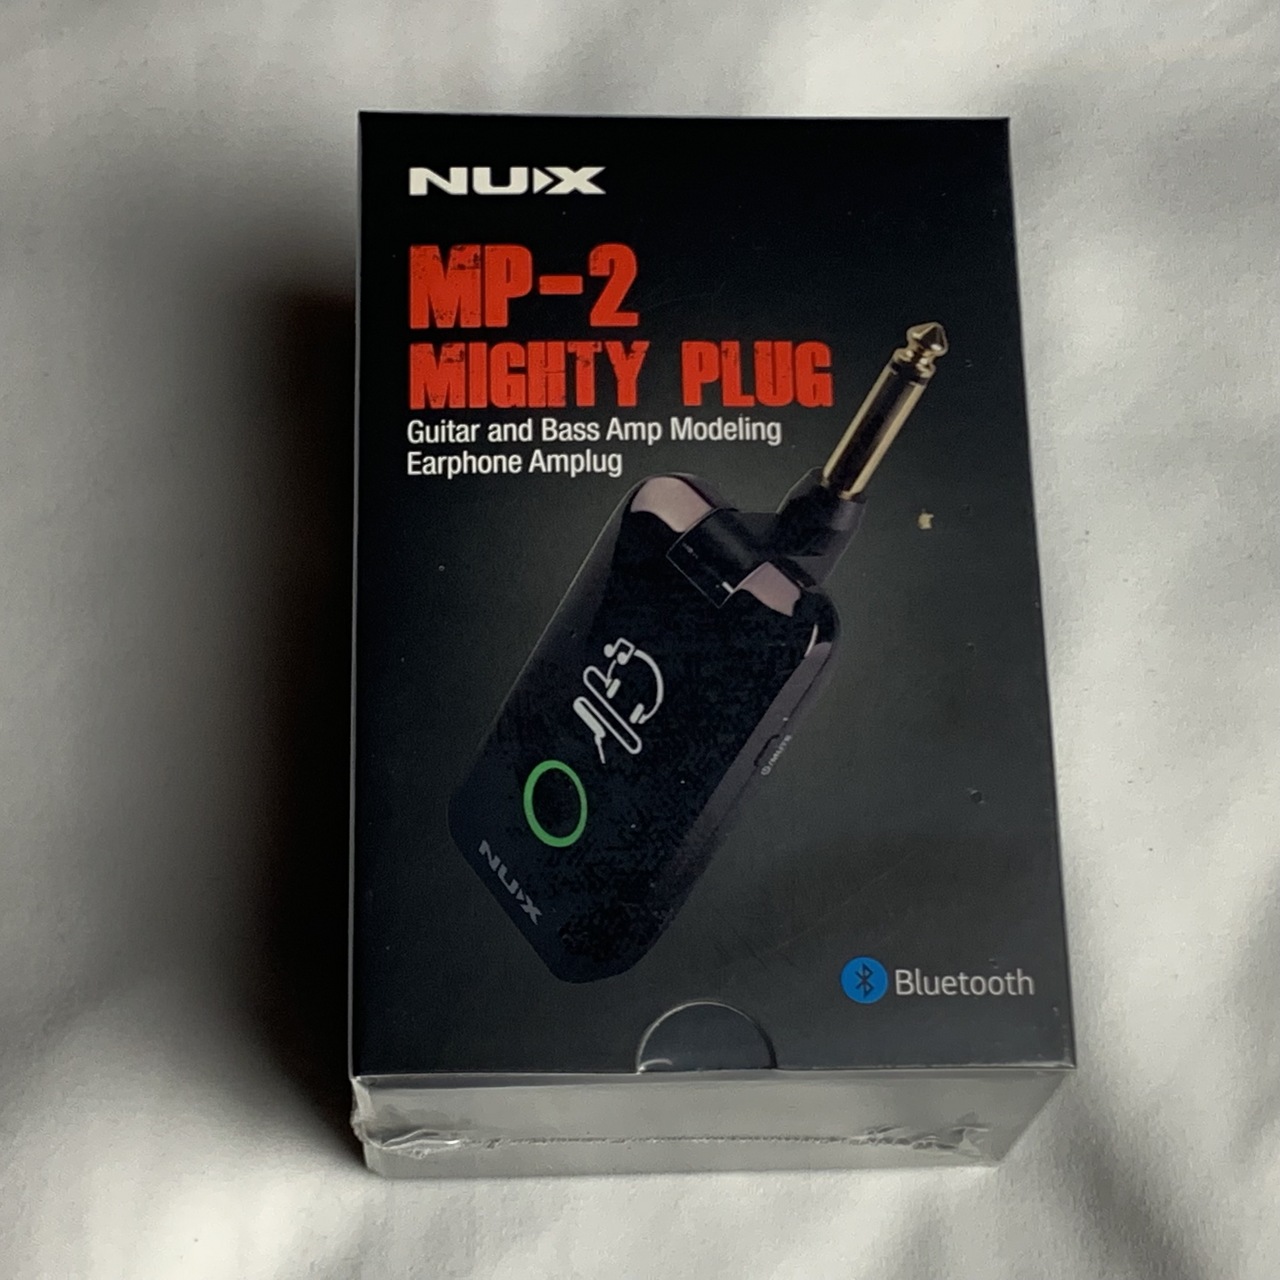 NUX ニューエックス Mighty Plug MP-2